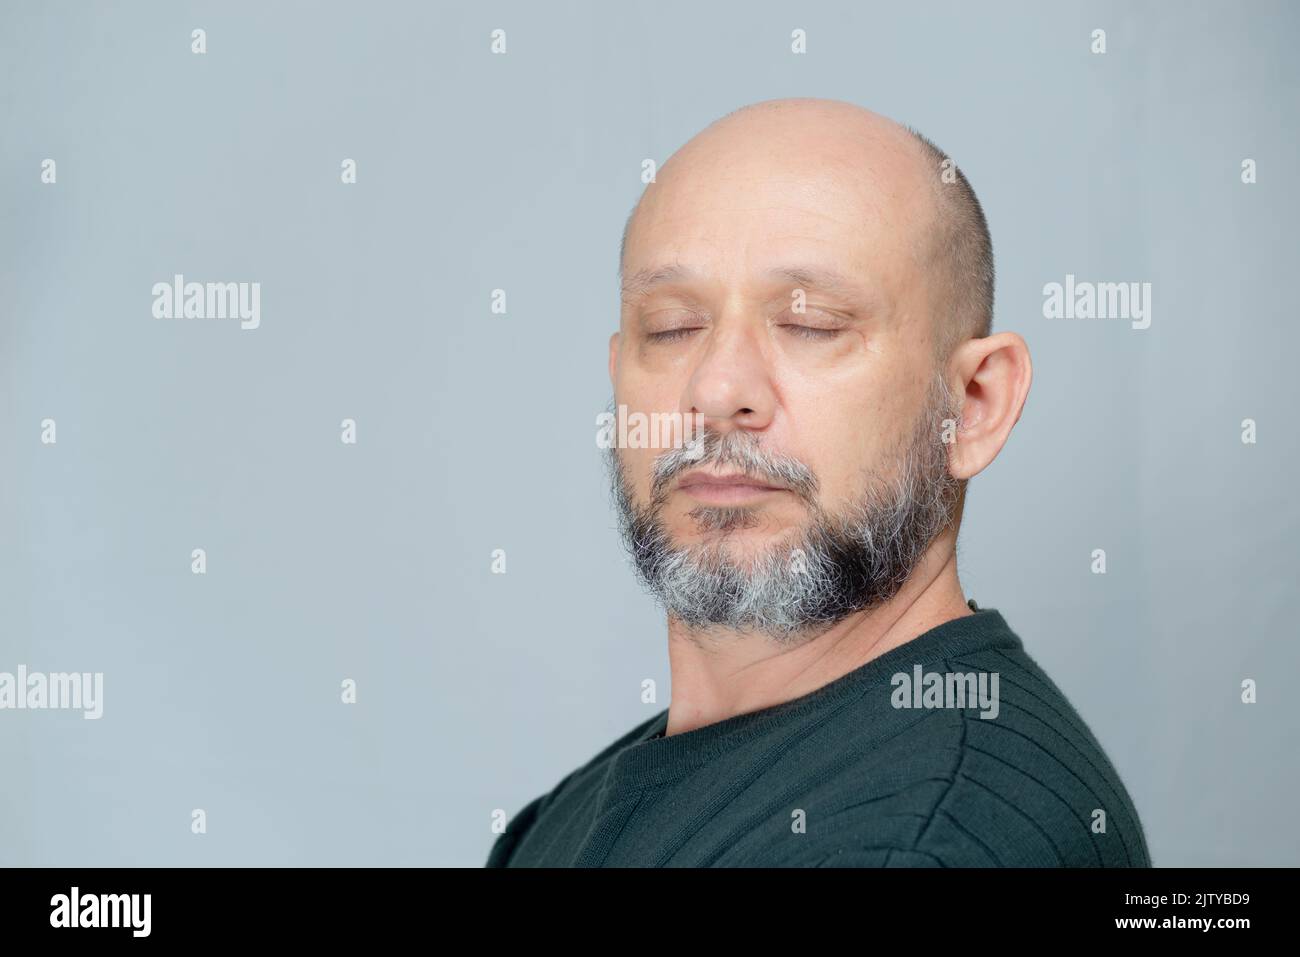 Portrait of mature man standing on light background. Bald bearded man with closed eyes. Formal style. Stock Photo